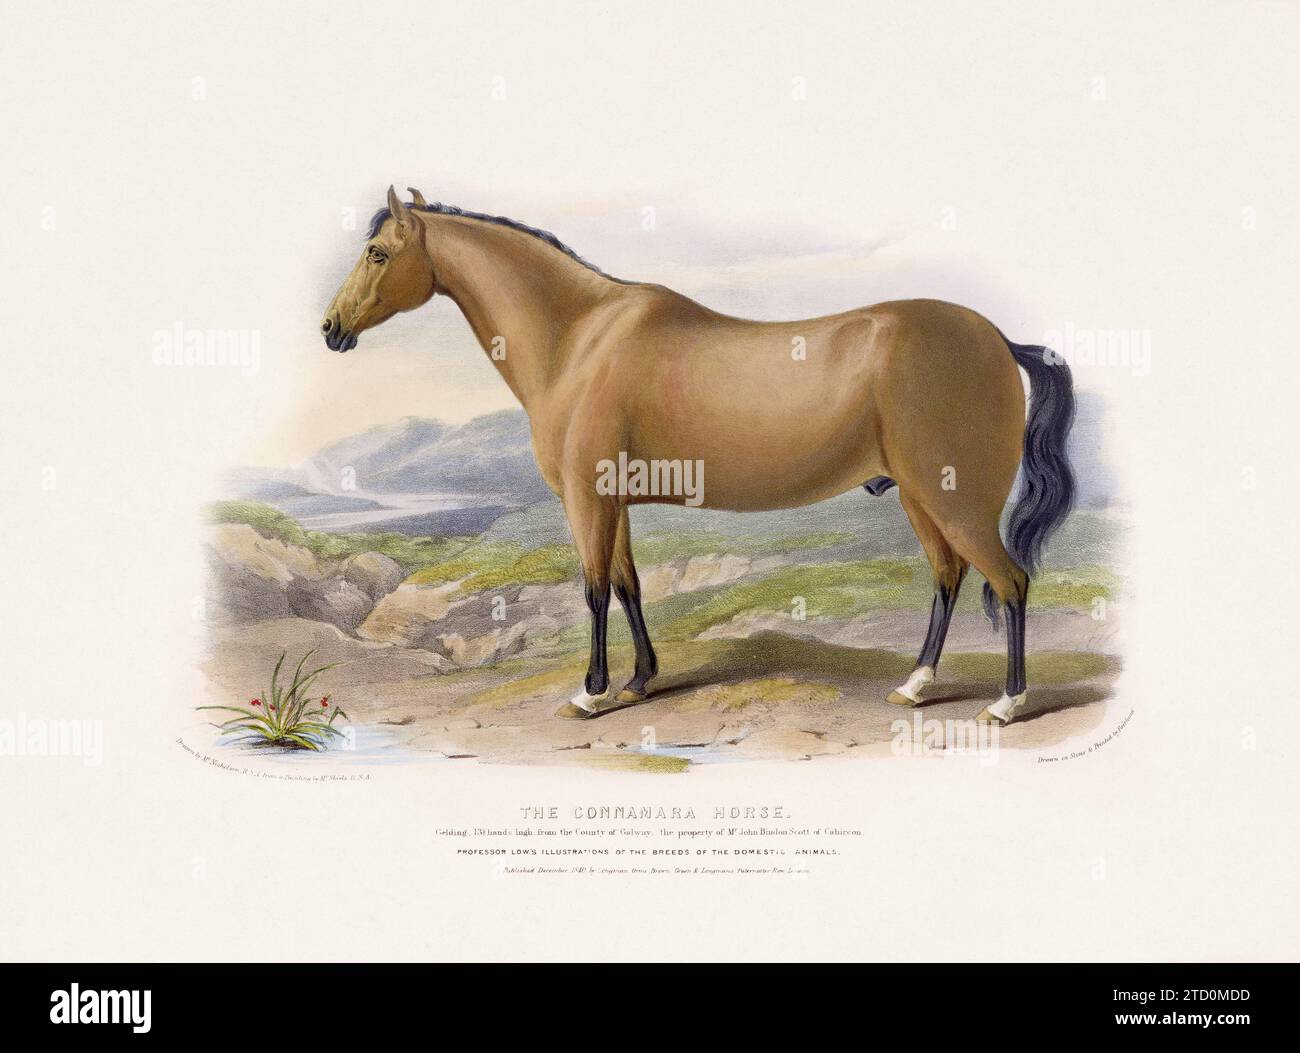 Vintage Horse illustration from a mid-19th-century book on domestic animal breeds. Stock Photo